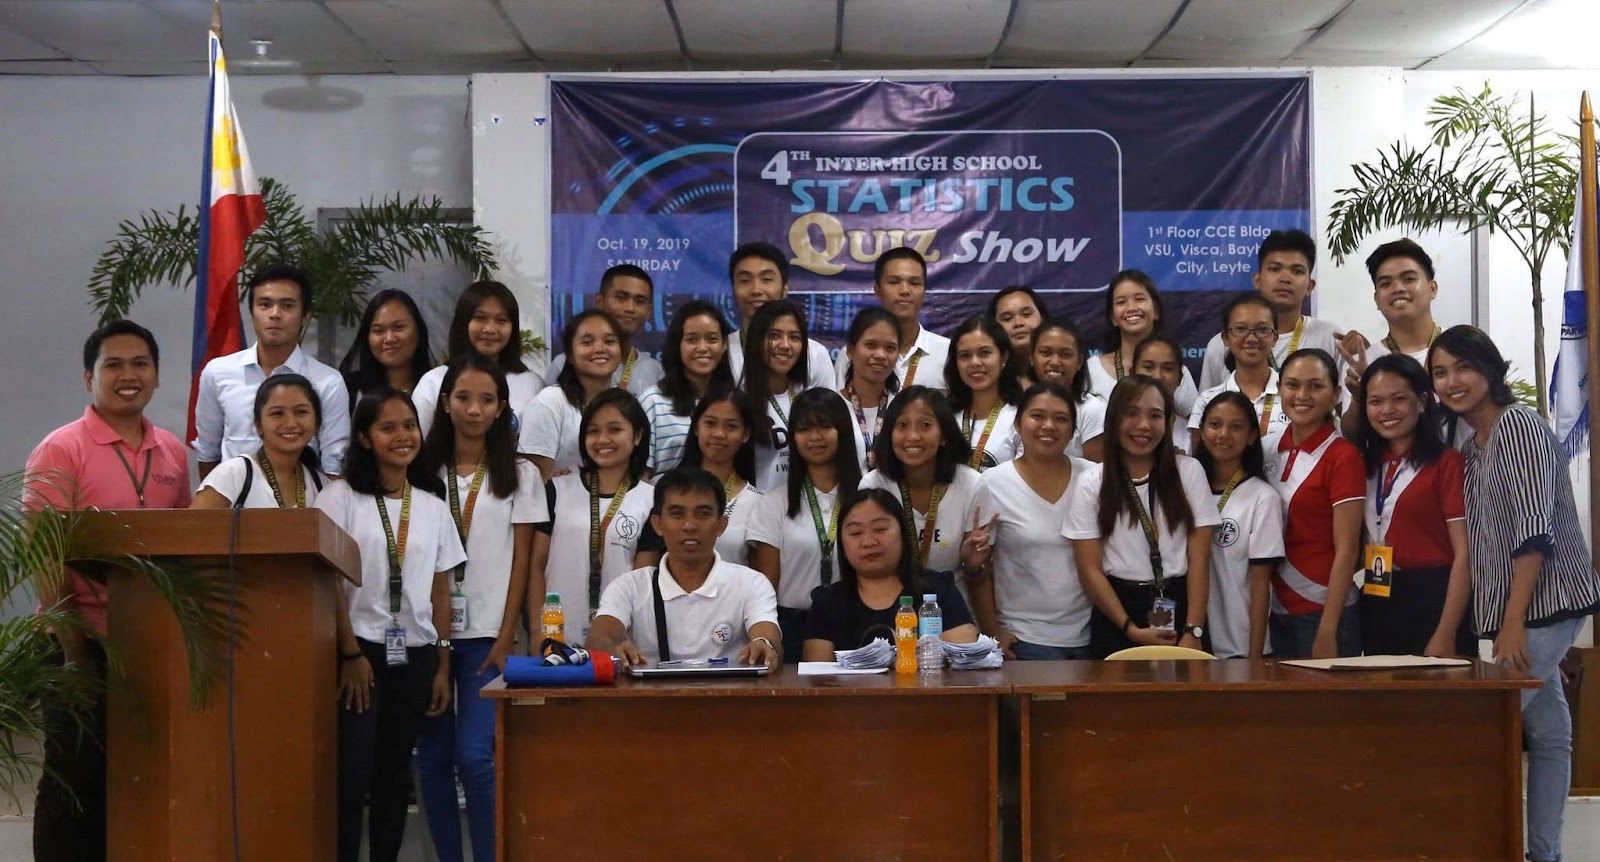 BSS students as the working committee during the 4th Inter-High School Statistics Quiz Show in 2019